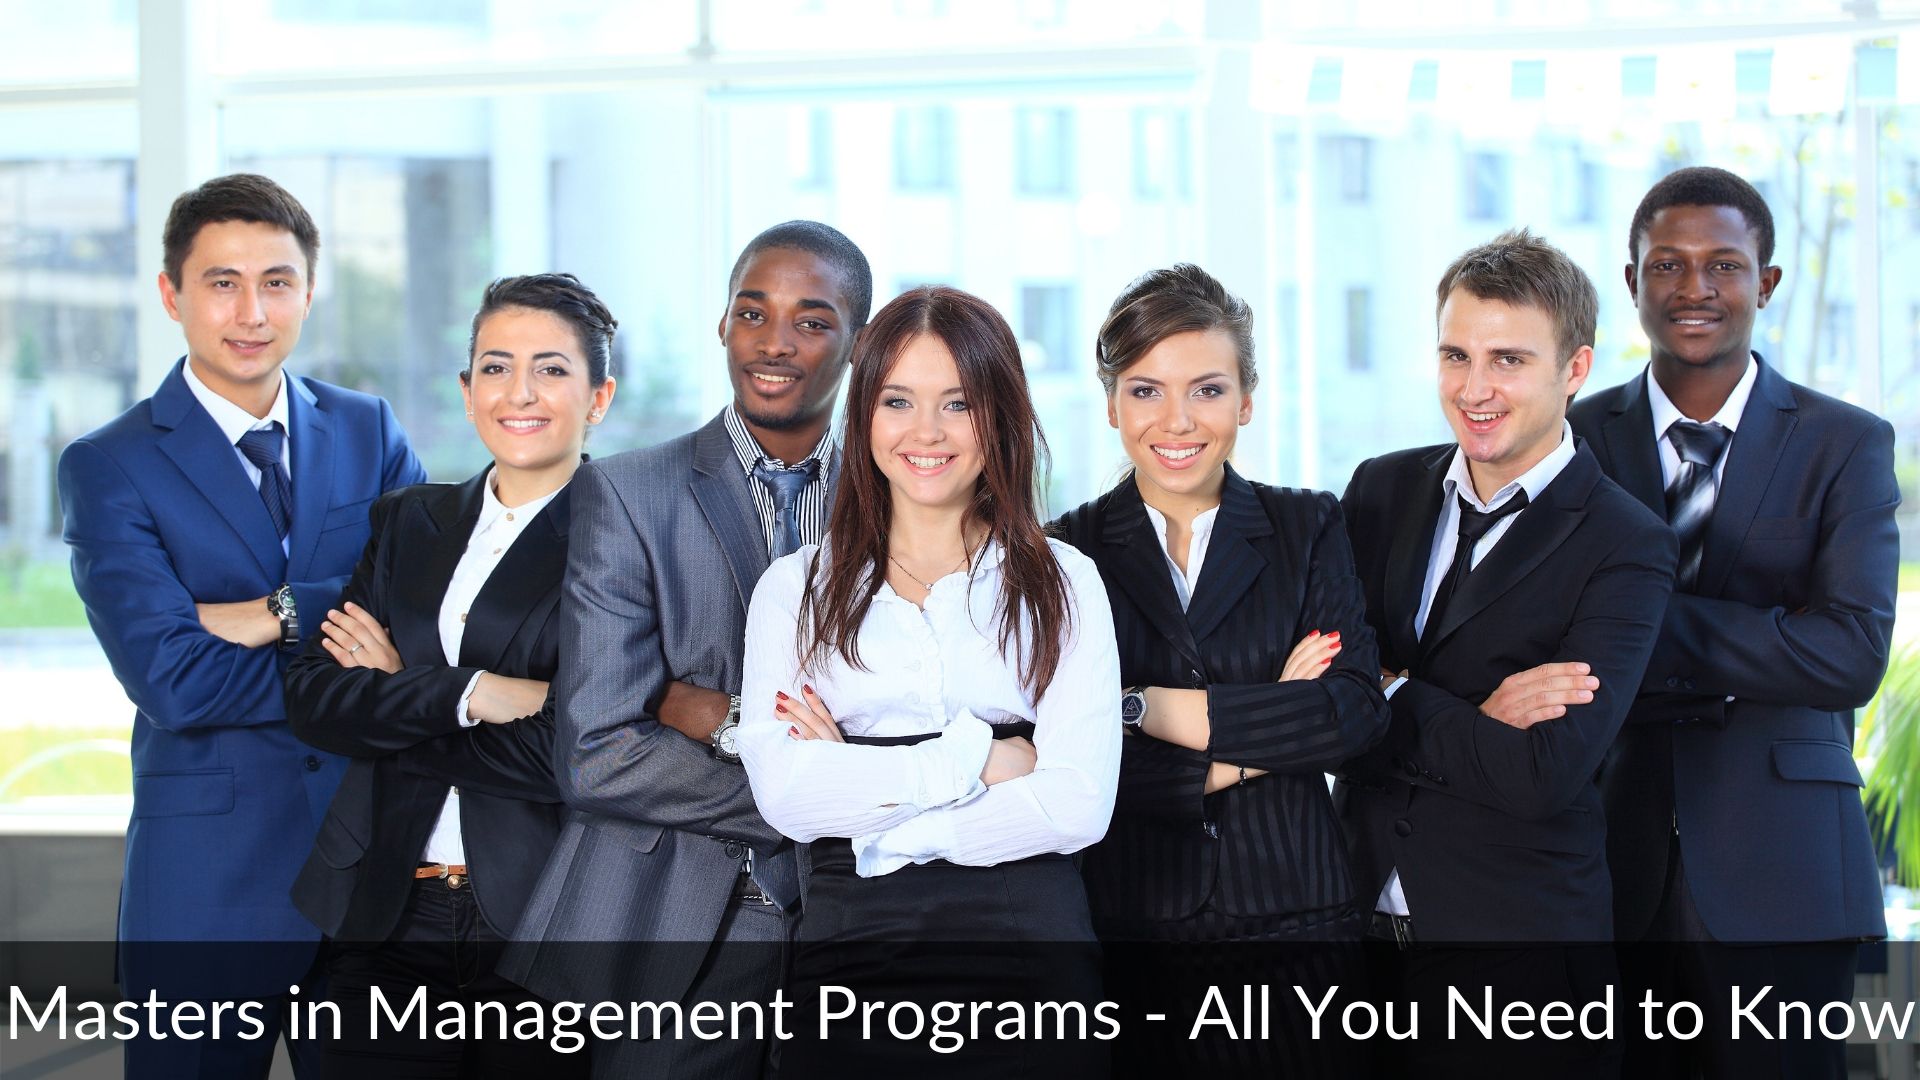 Masters in Management Program - All You Need to Know (1)